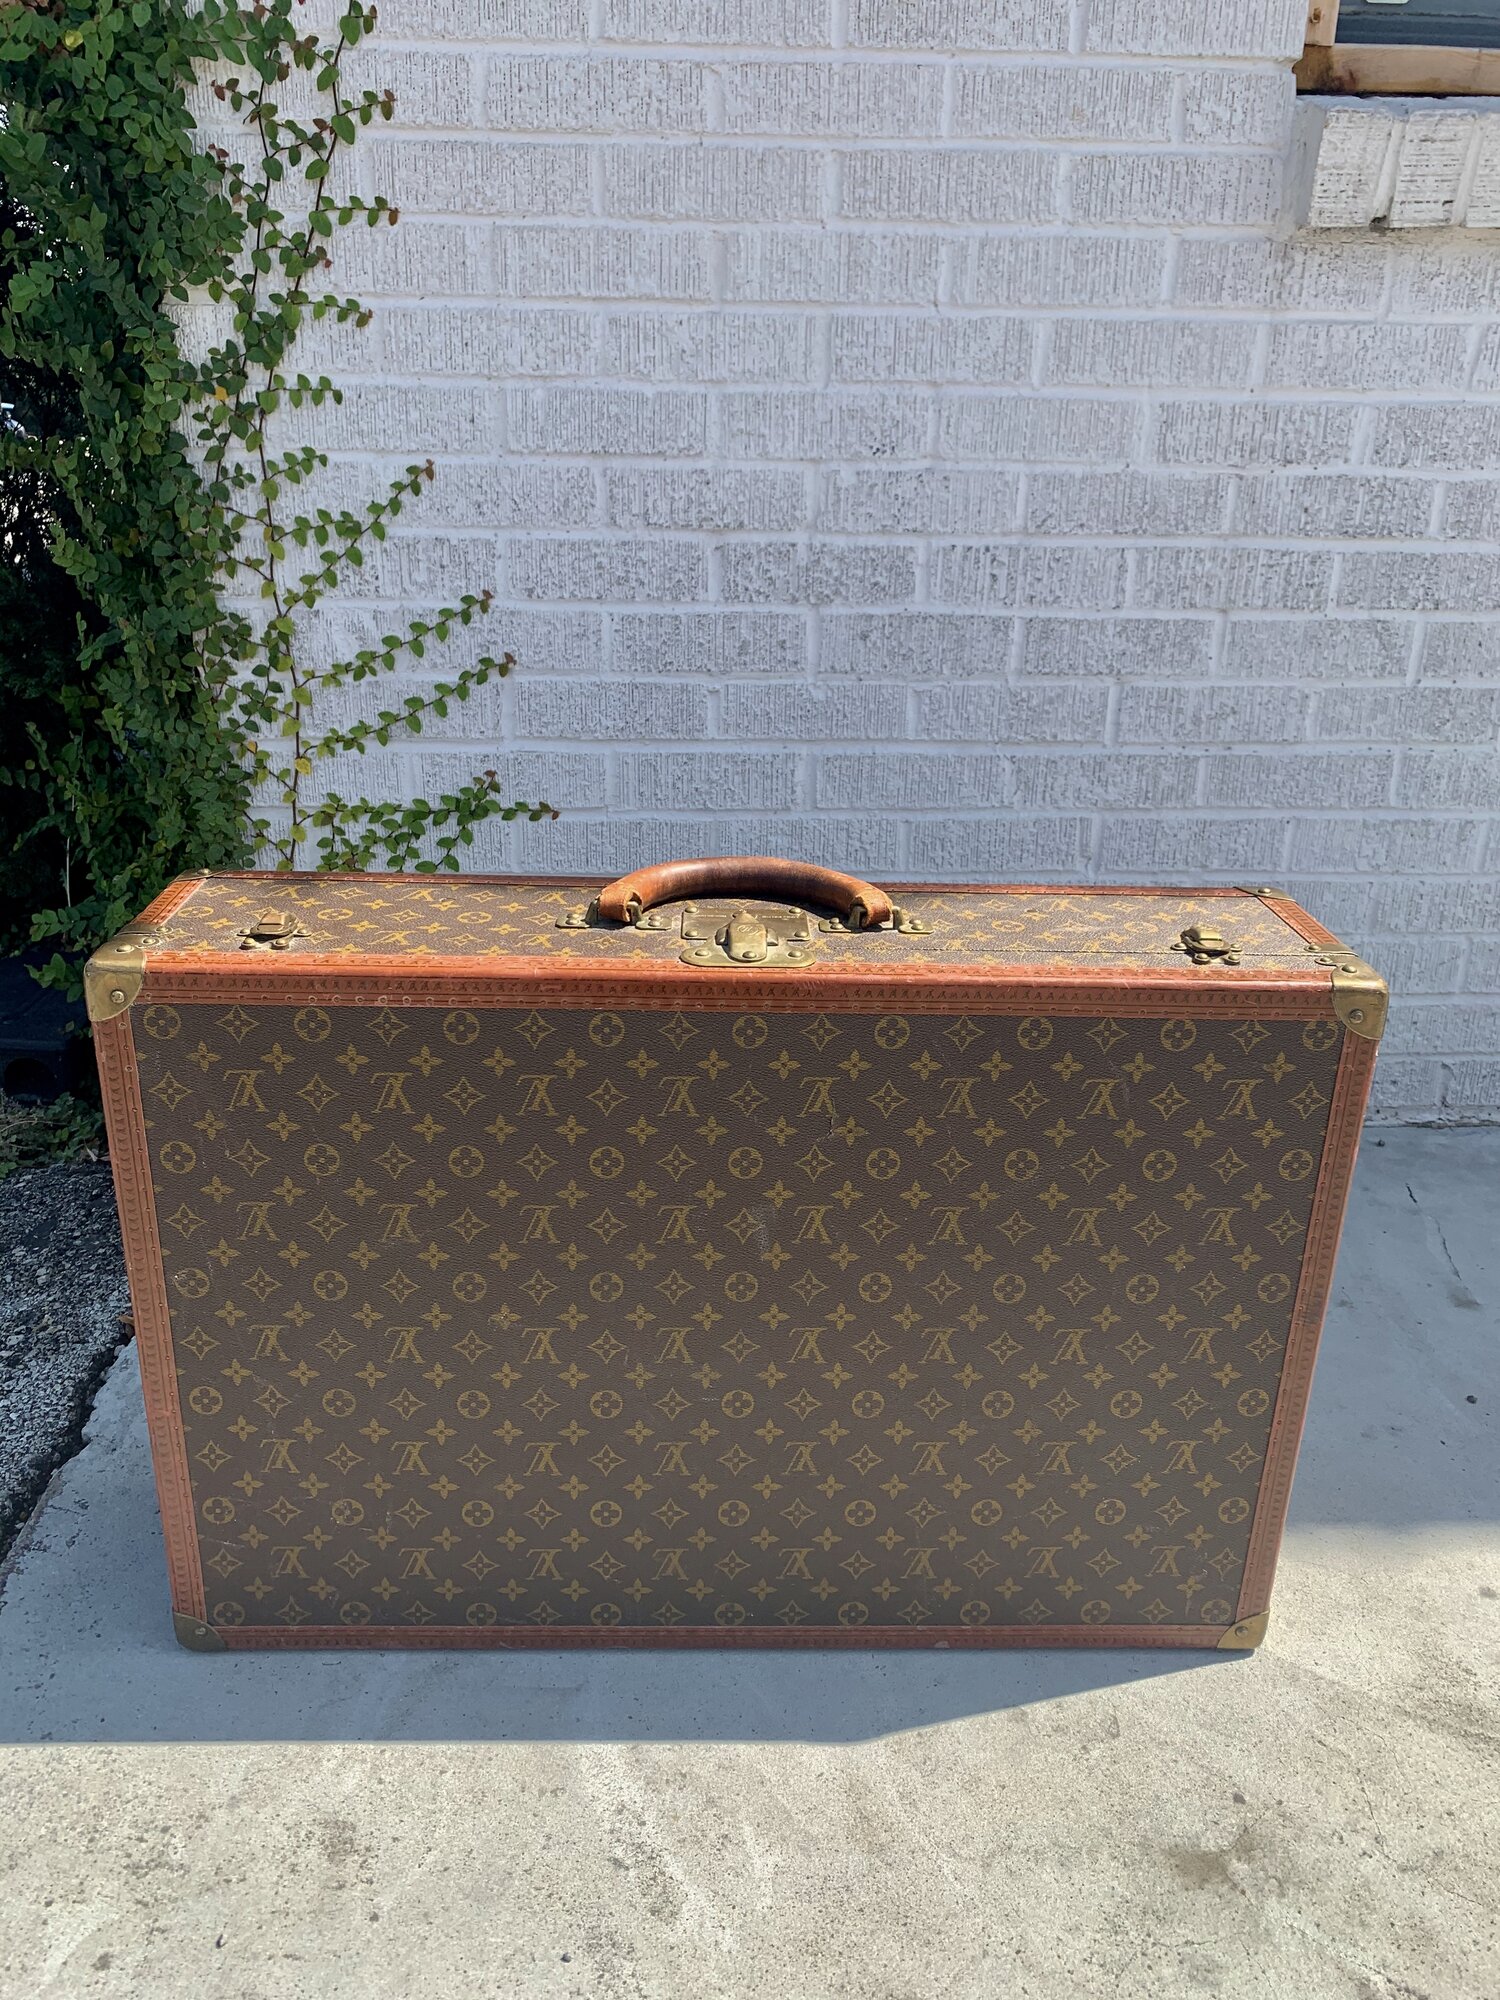 Monogrammed Canvas Suitcase with Zip and Rounded Edges from Louis Vuitton,  1960s for sale at Pamono